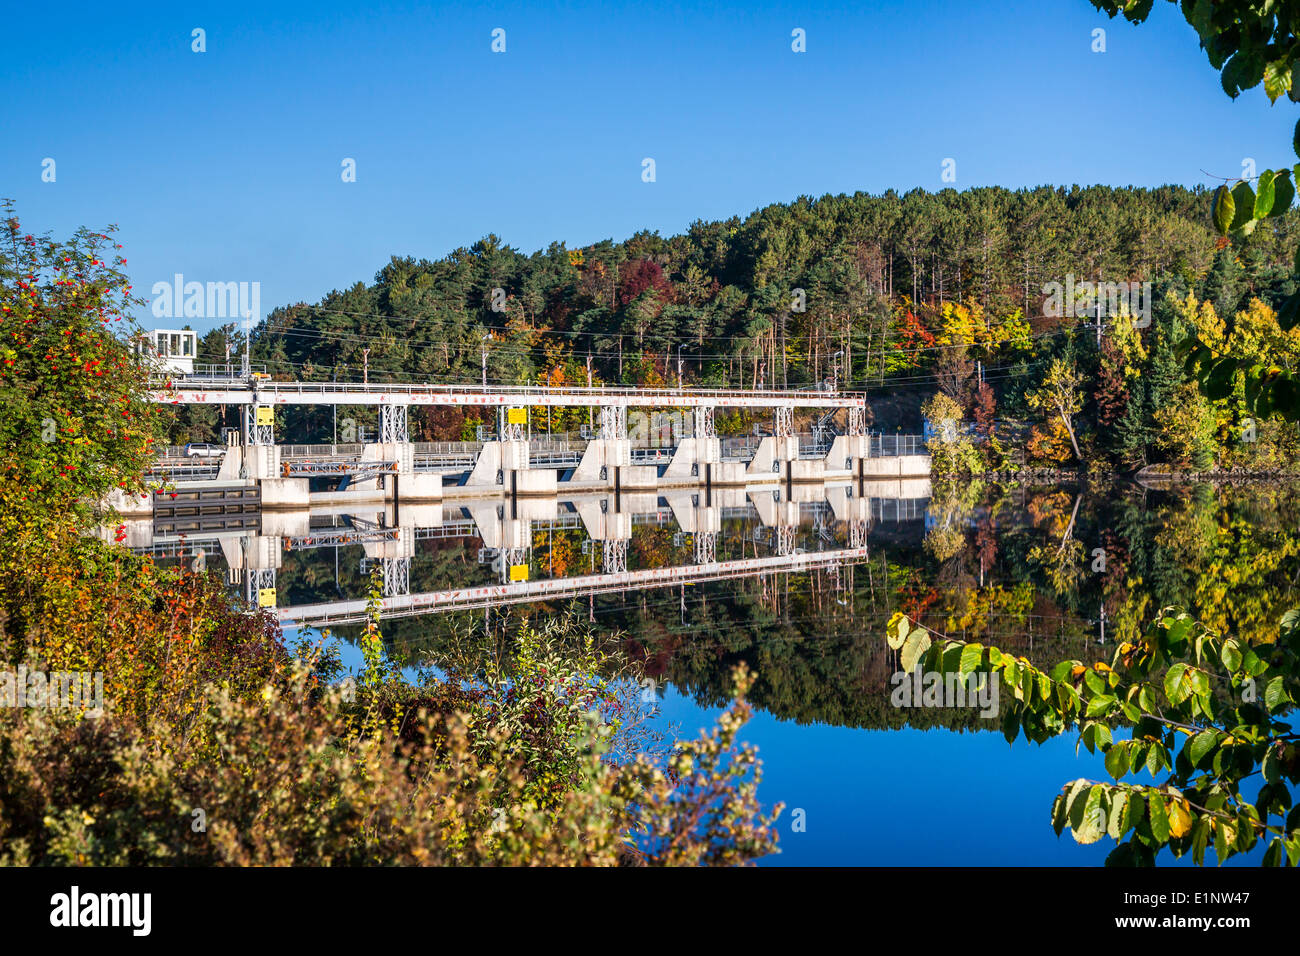 The Hydro Quebec dam on the Saint Maurice River in Shawinigan, Quebec, Canada. Stock Photo